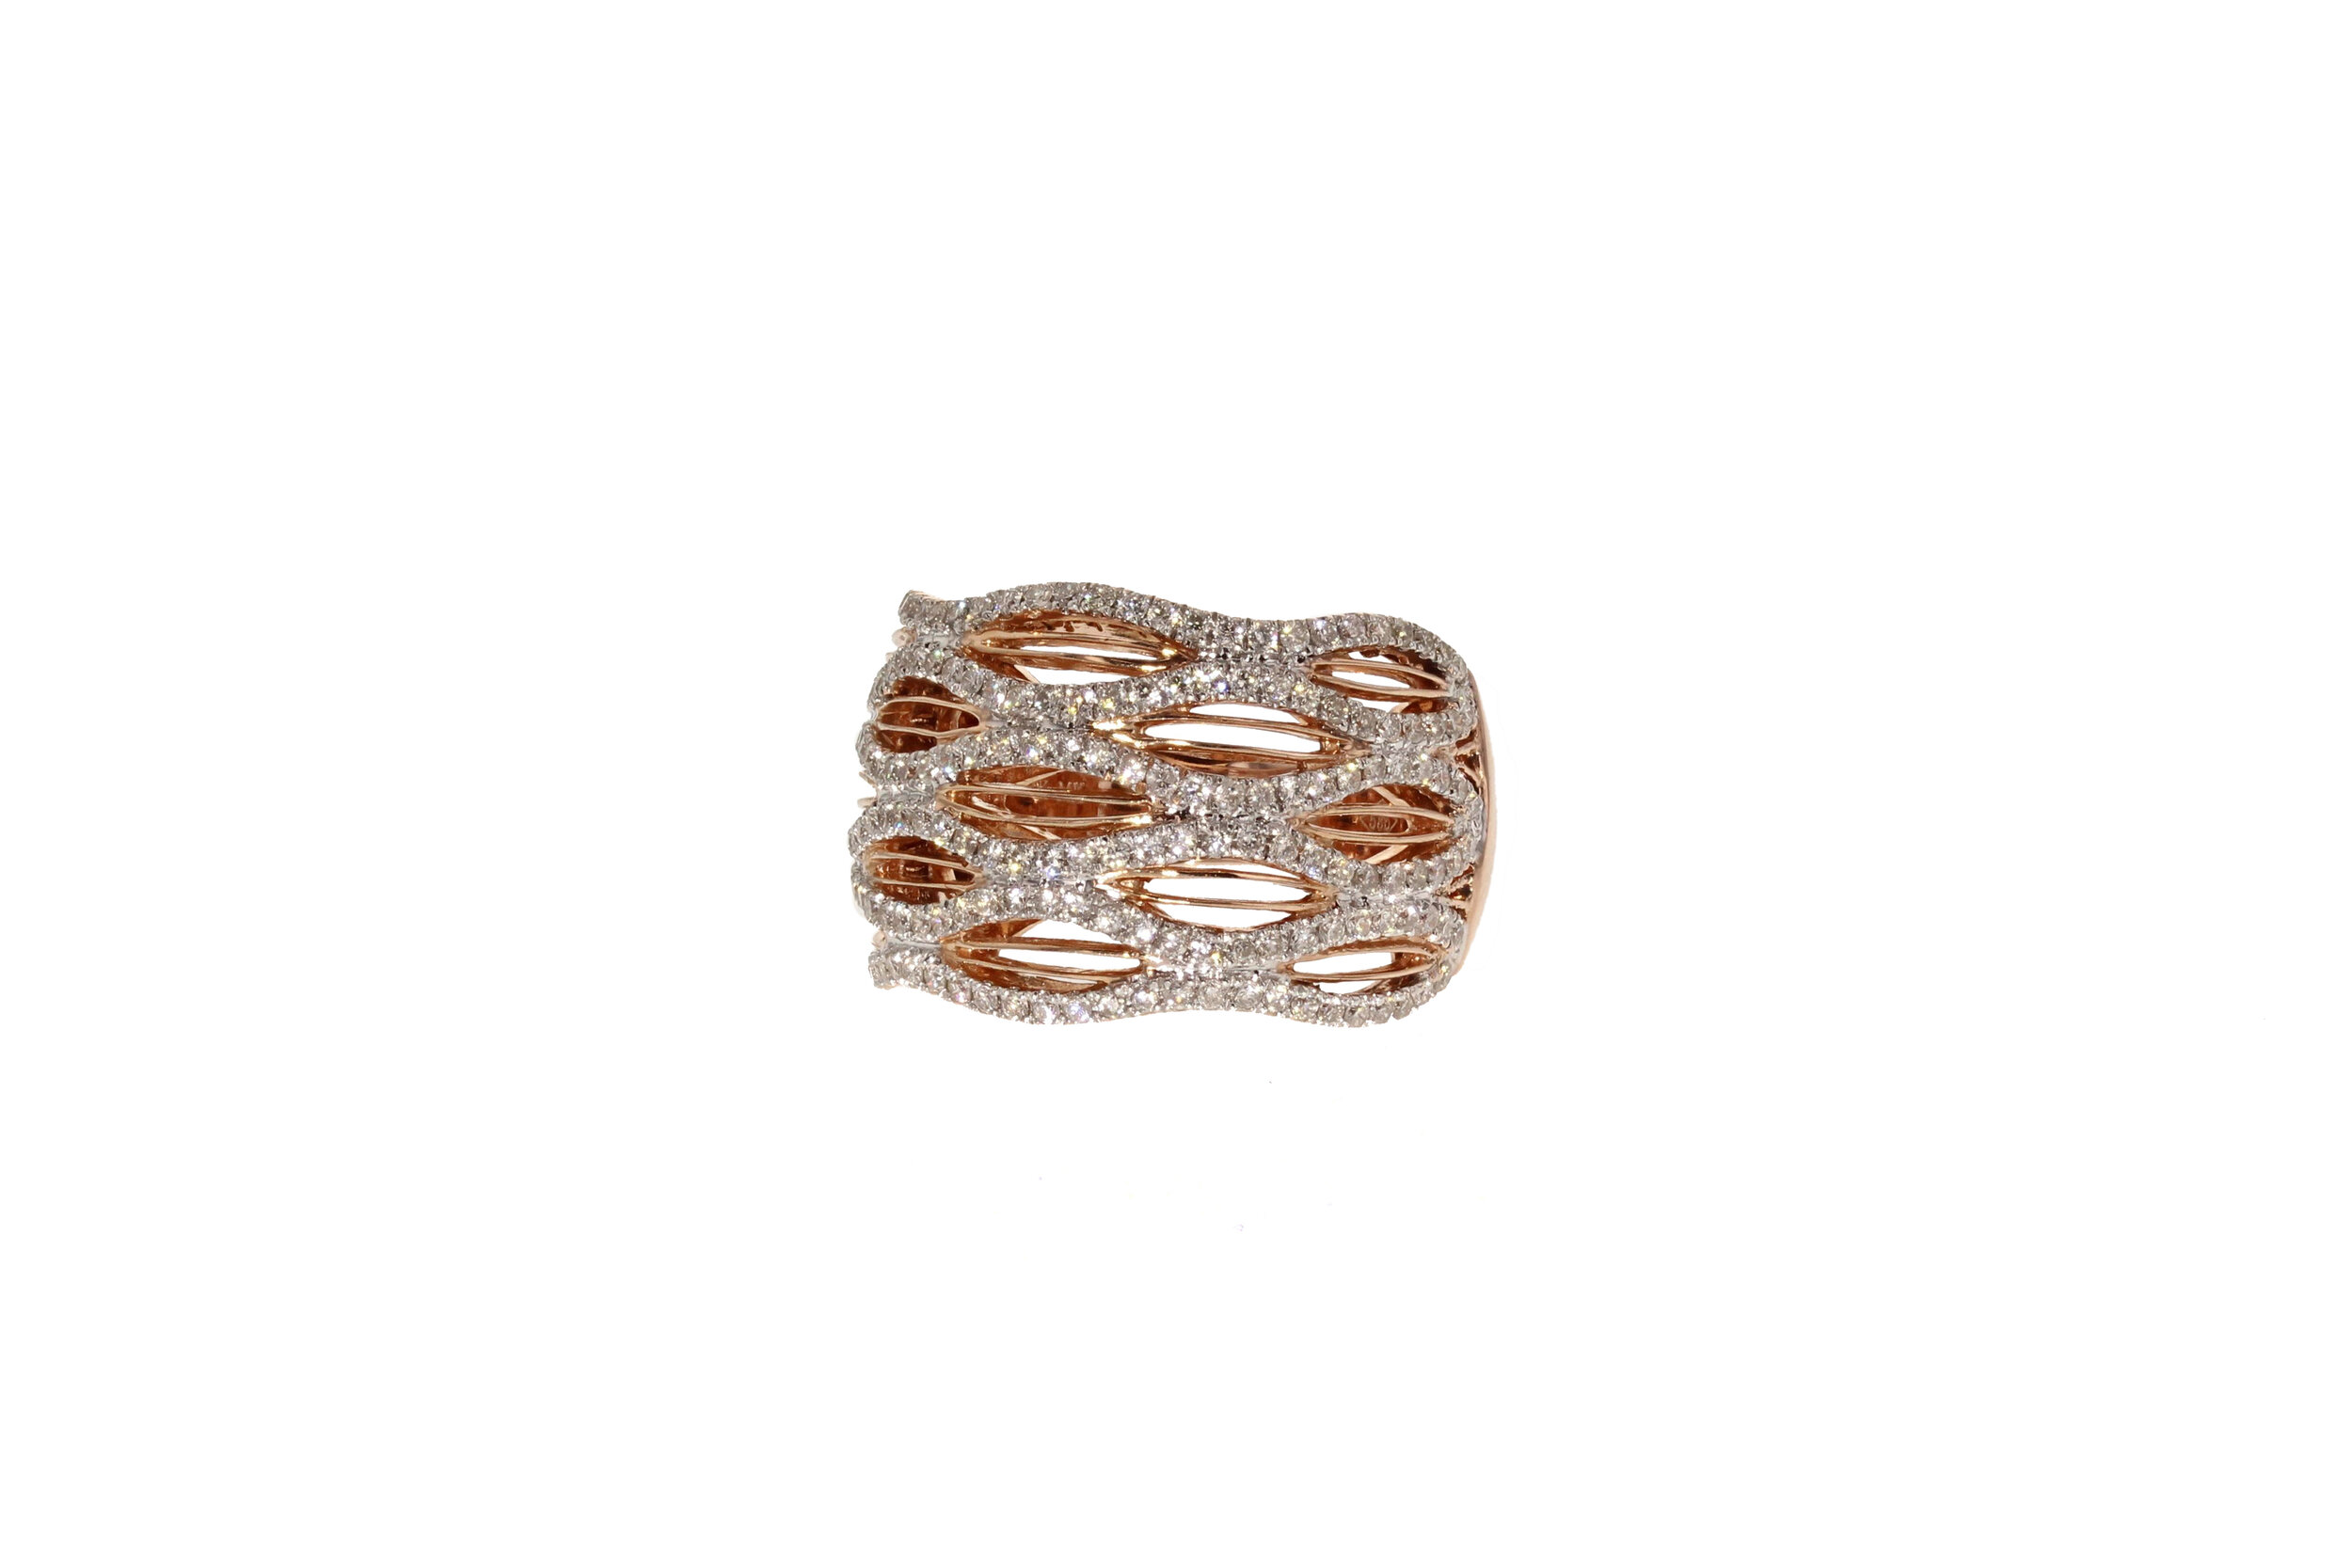 Intricate 14K Rose Gold “Wave” design ring with 1.07 ctw. of Diamond Pavé. $4530